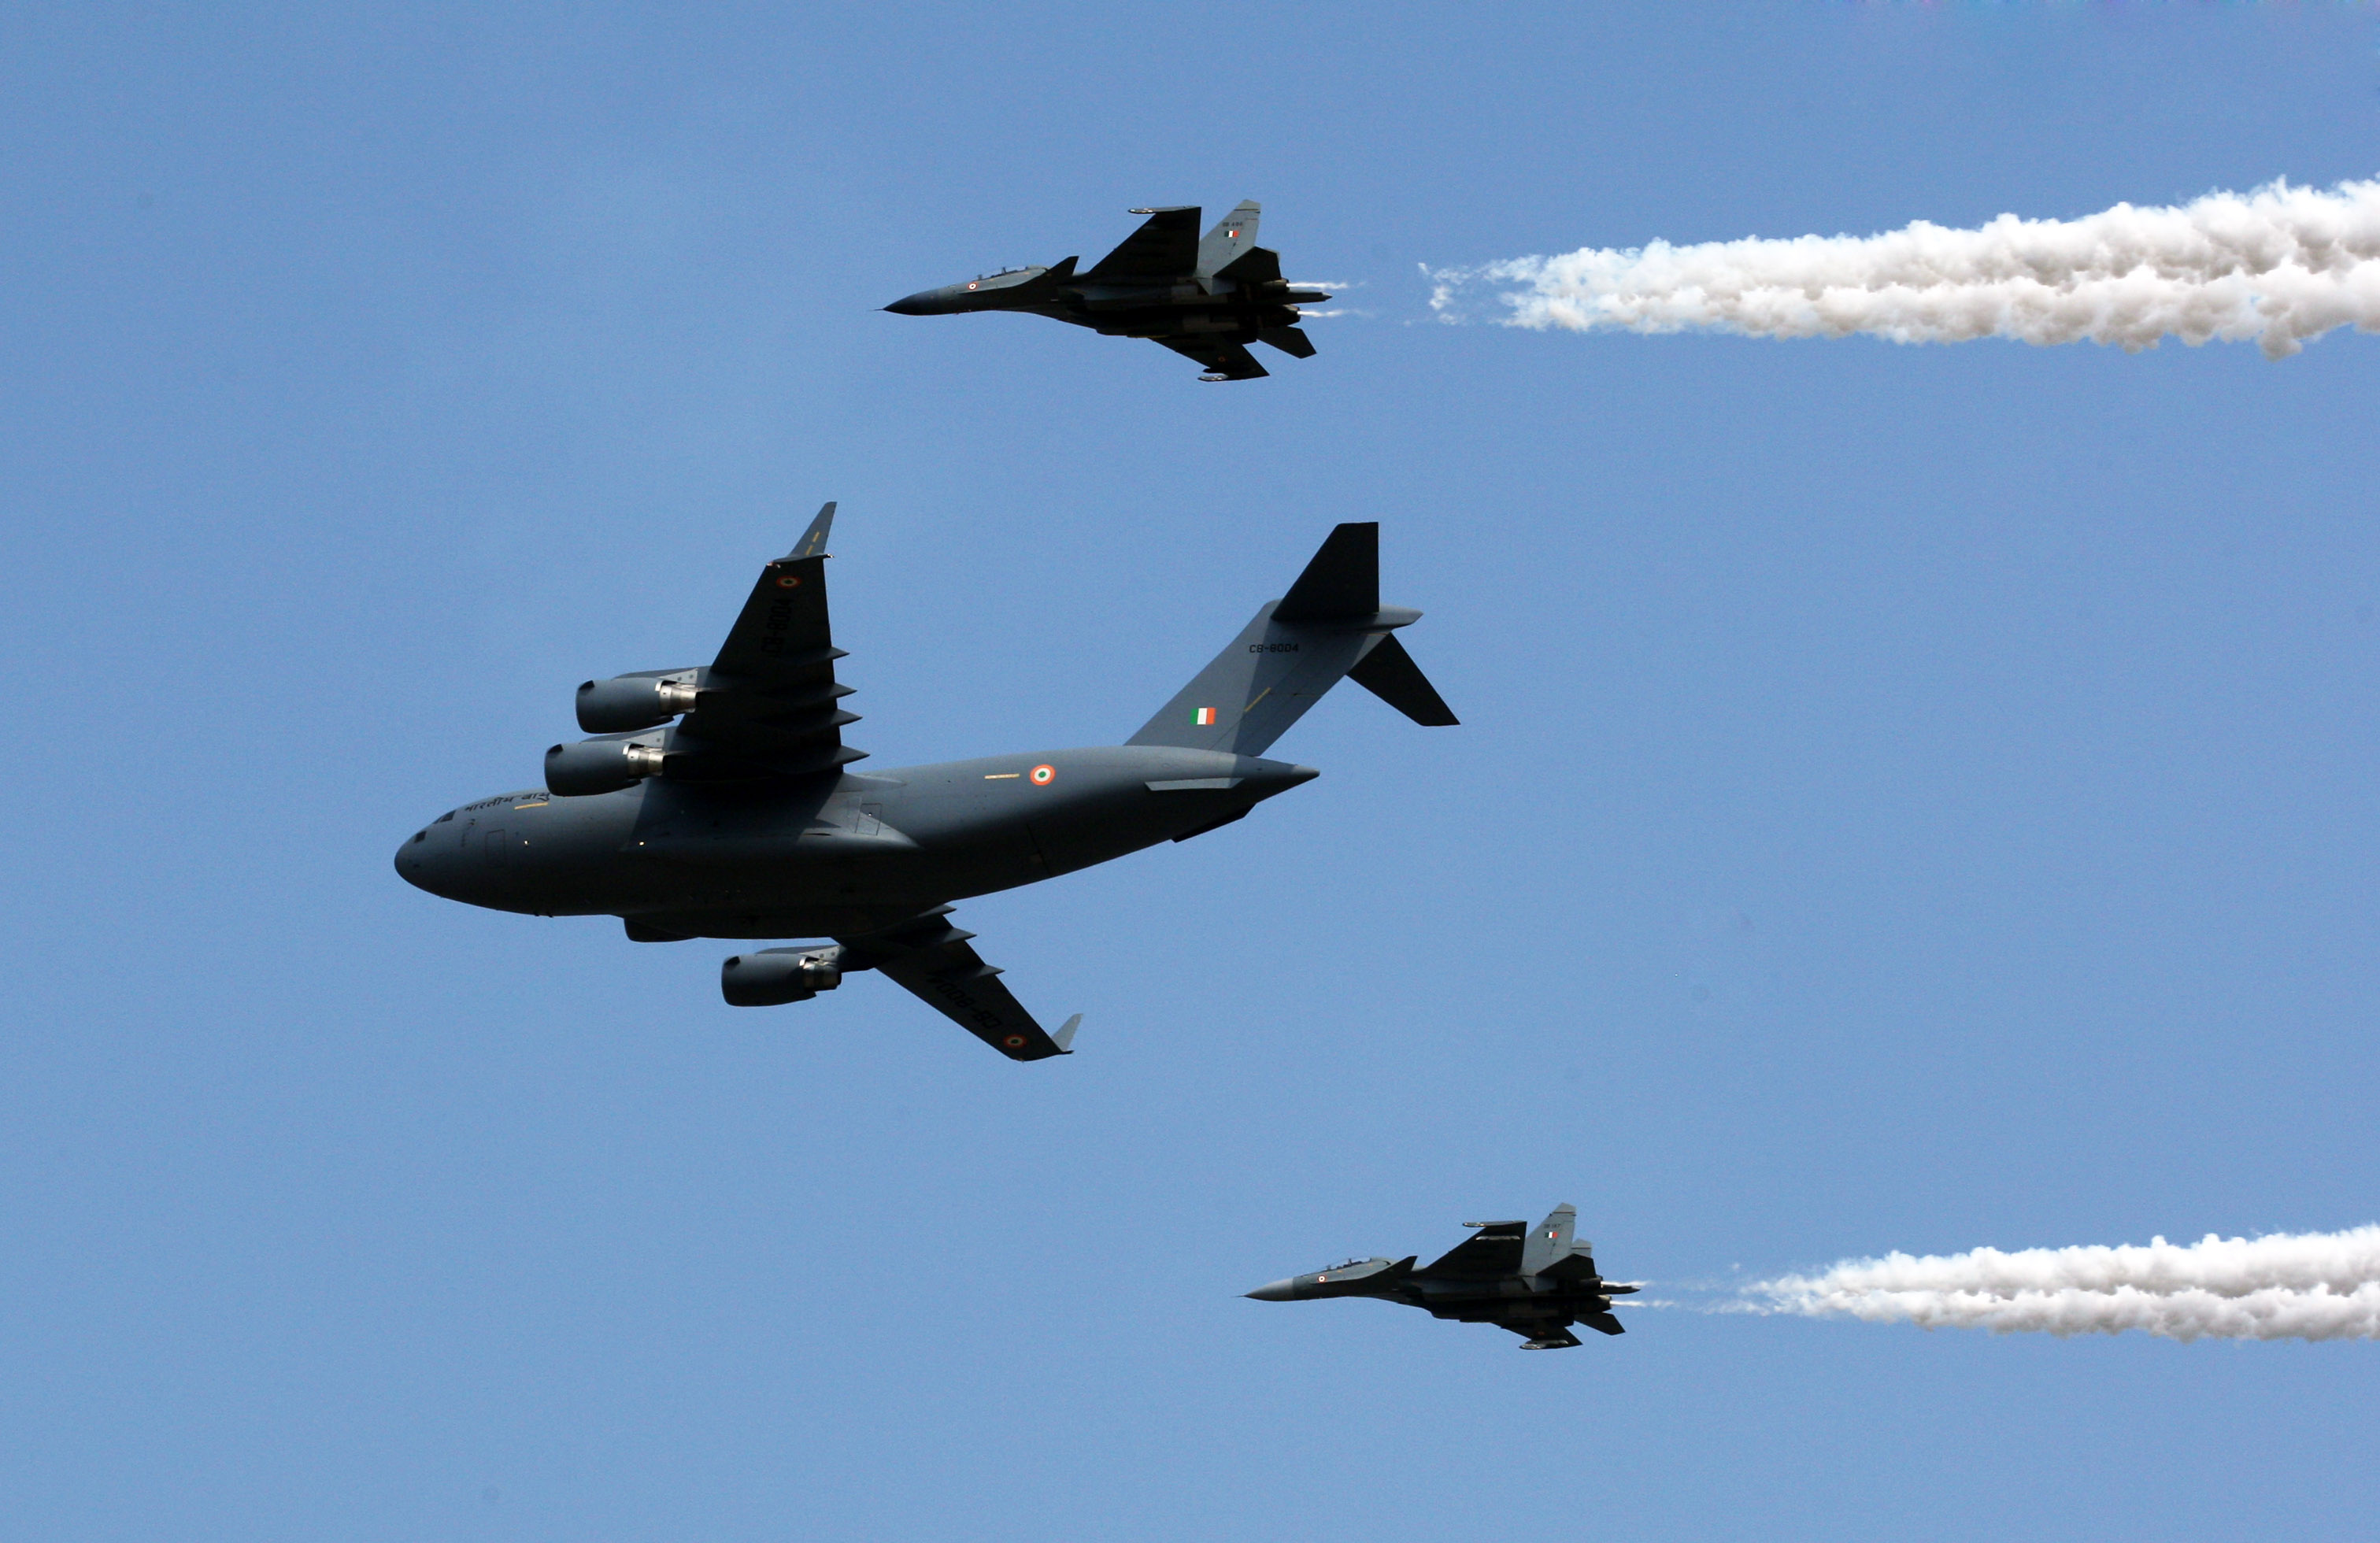 Glimpses-of-Indian-Air-Force-Day-2014-PHOTO-5.jpg